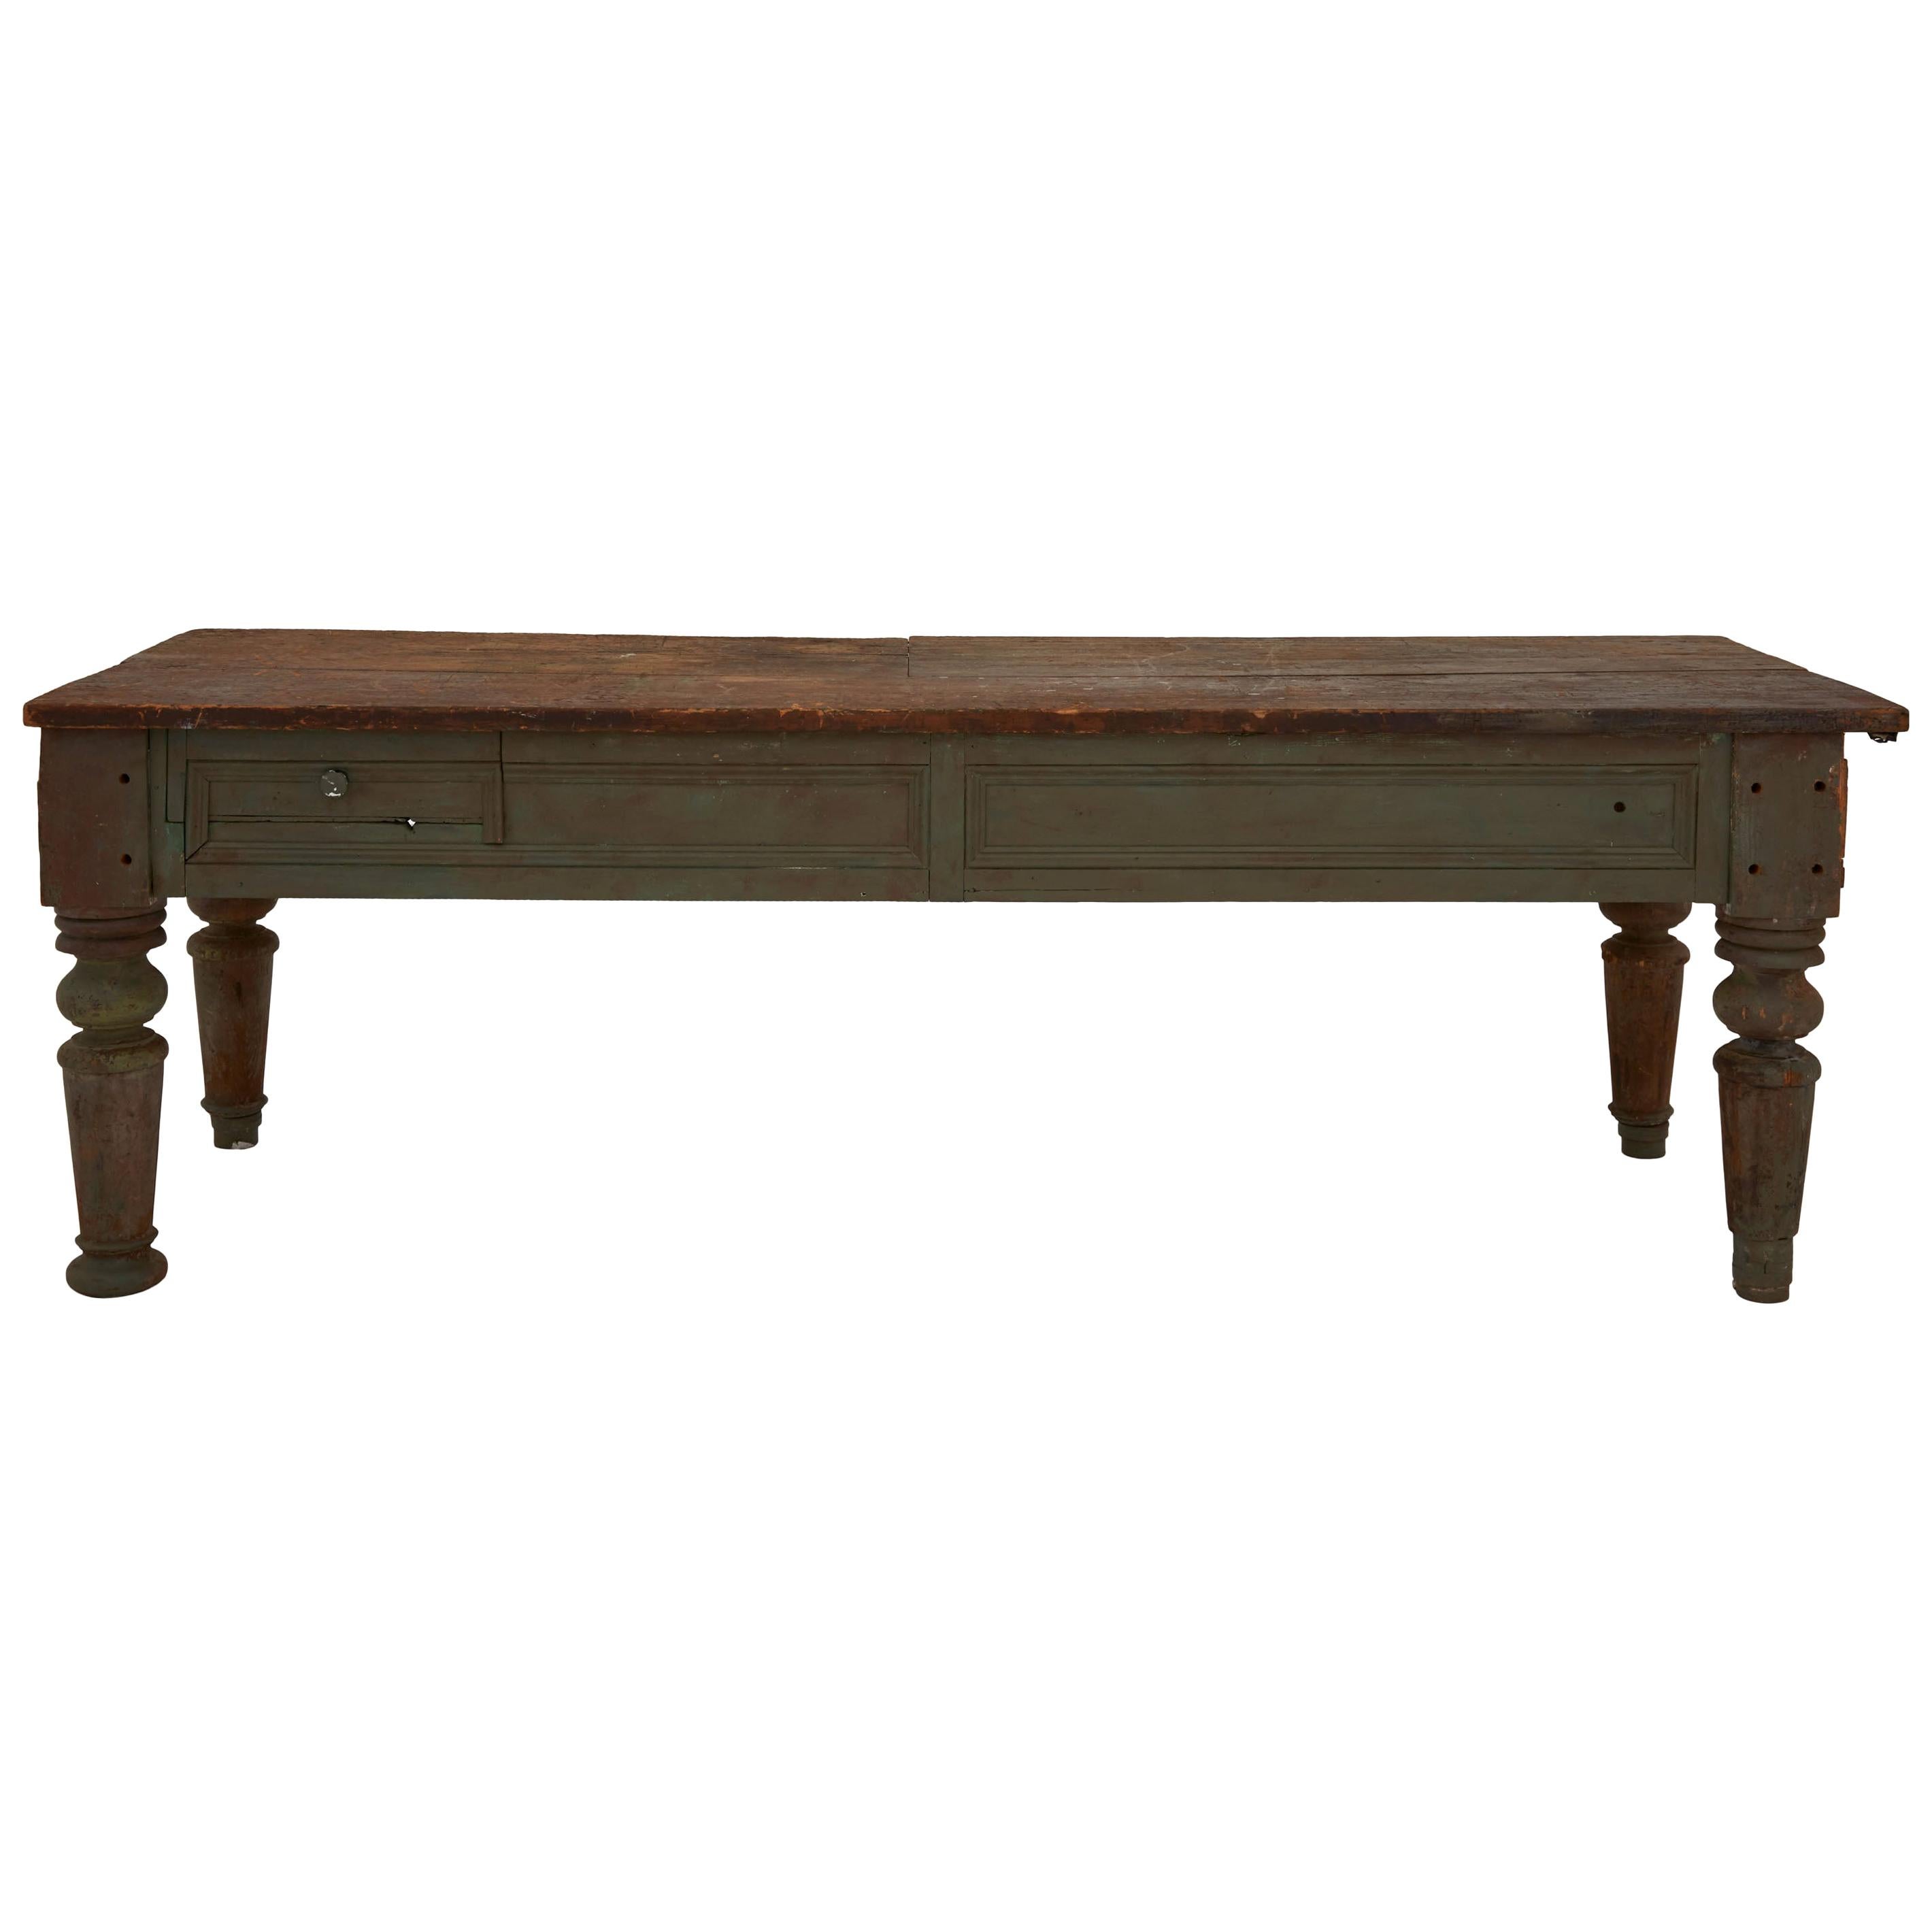 Late 19th Century Painted Wood Farm Table im Angebot